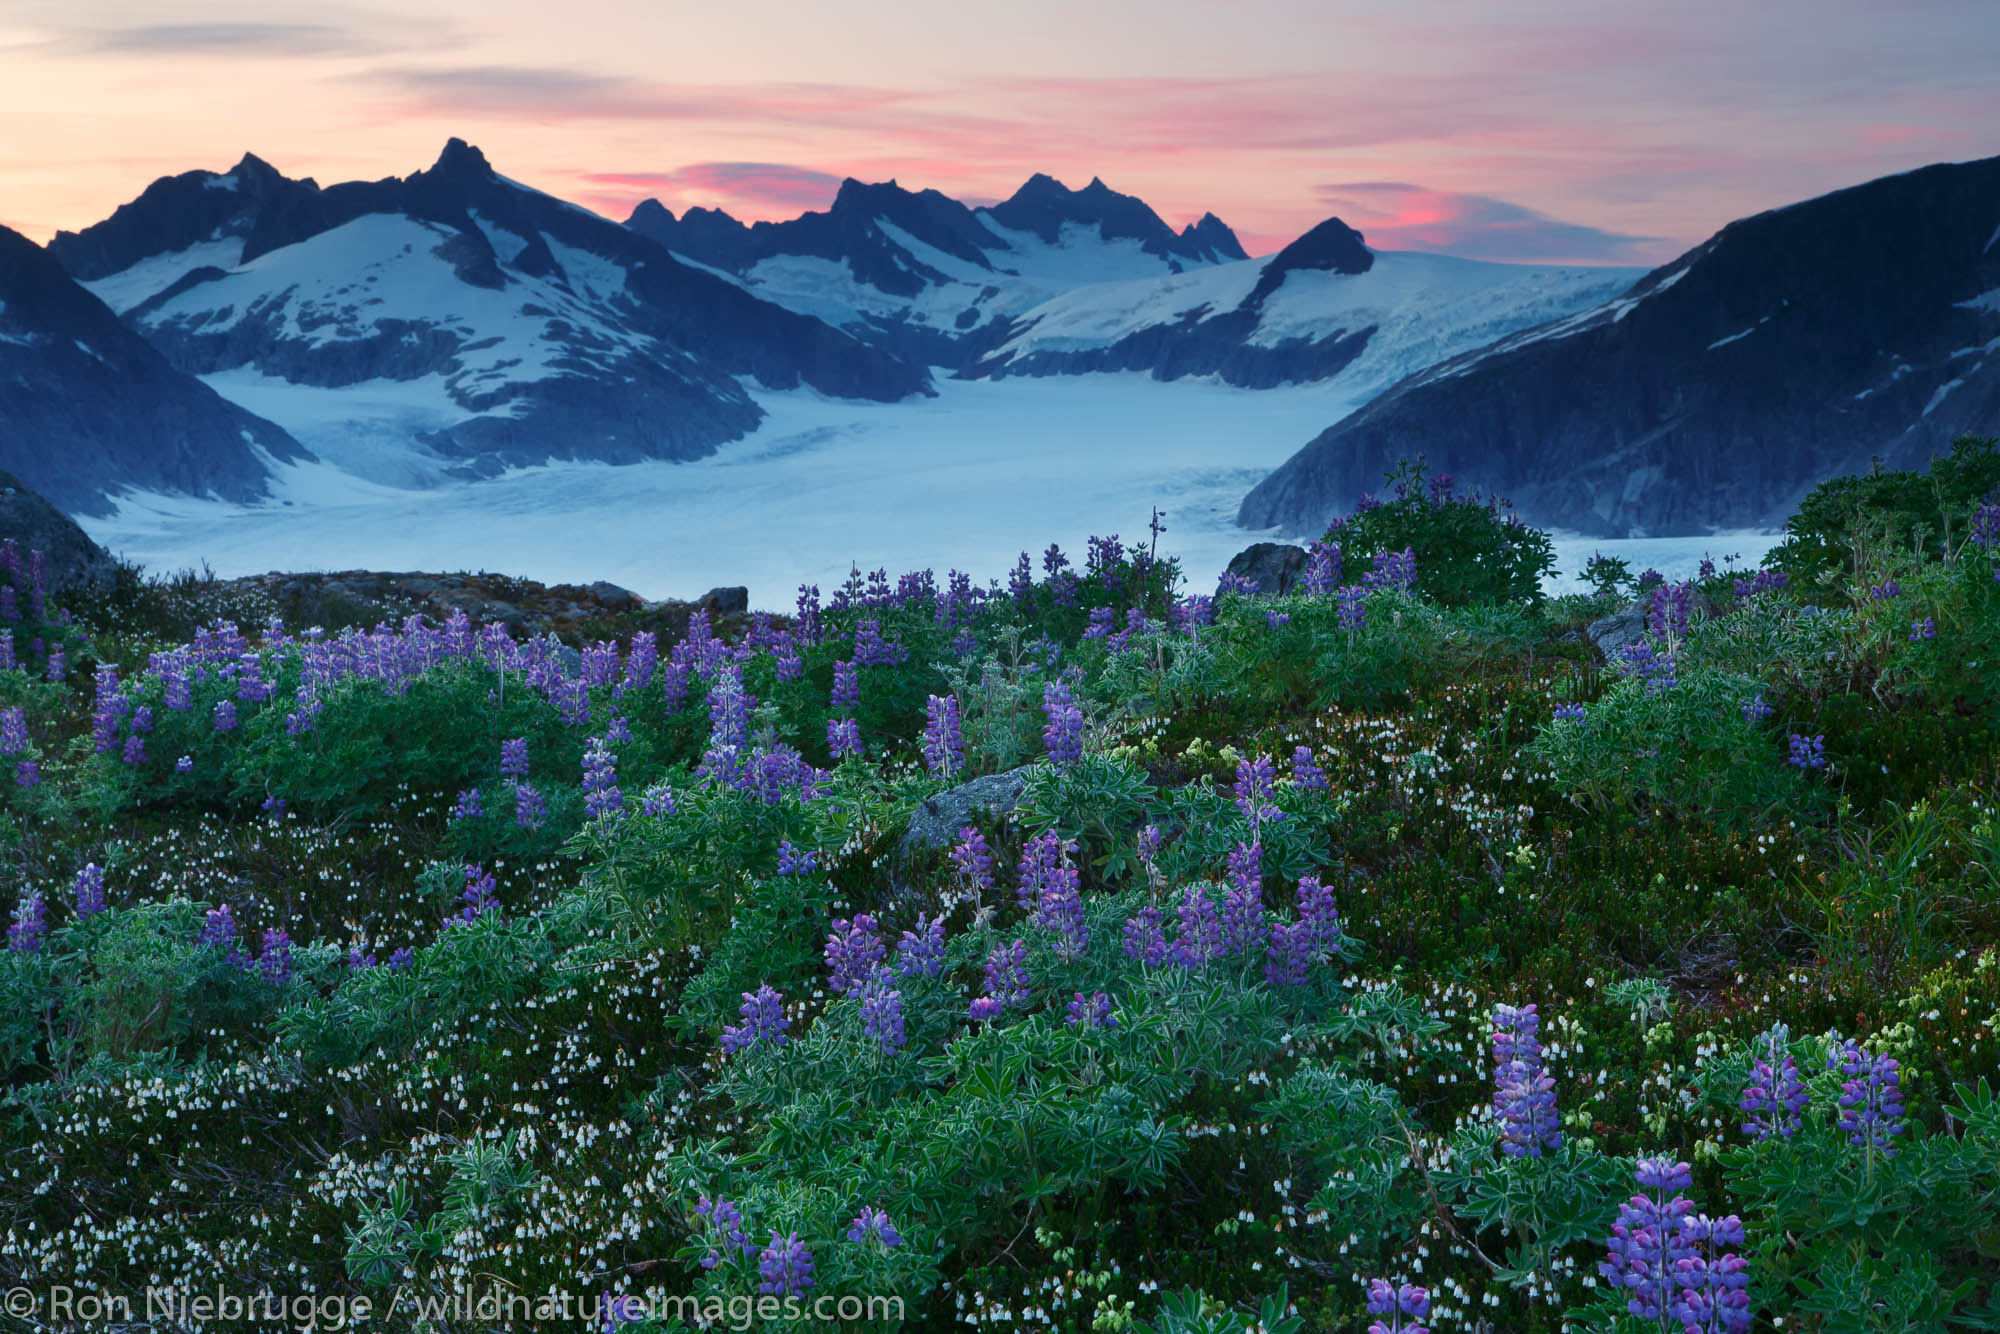 Wildflowers on Mount Stroller White above the Mendenhall Glacier, Tongass National Forest, Alaska